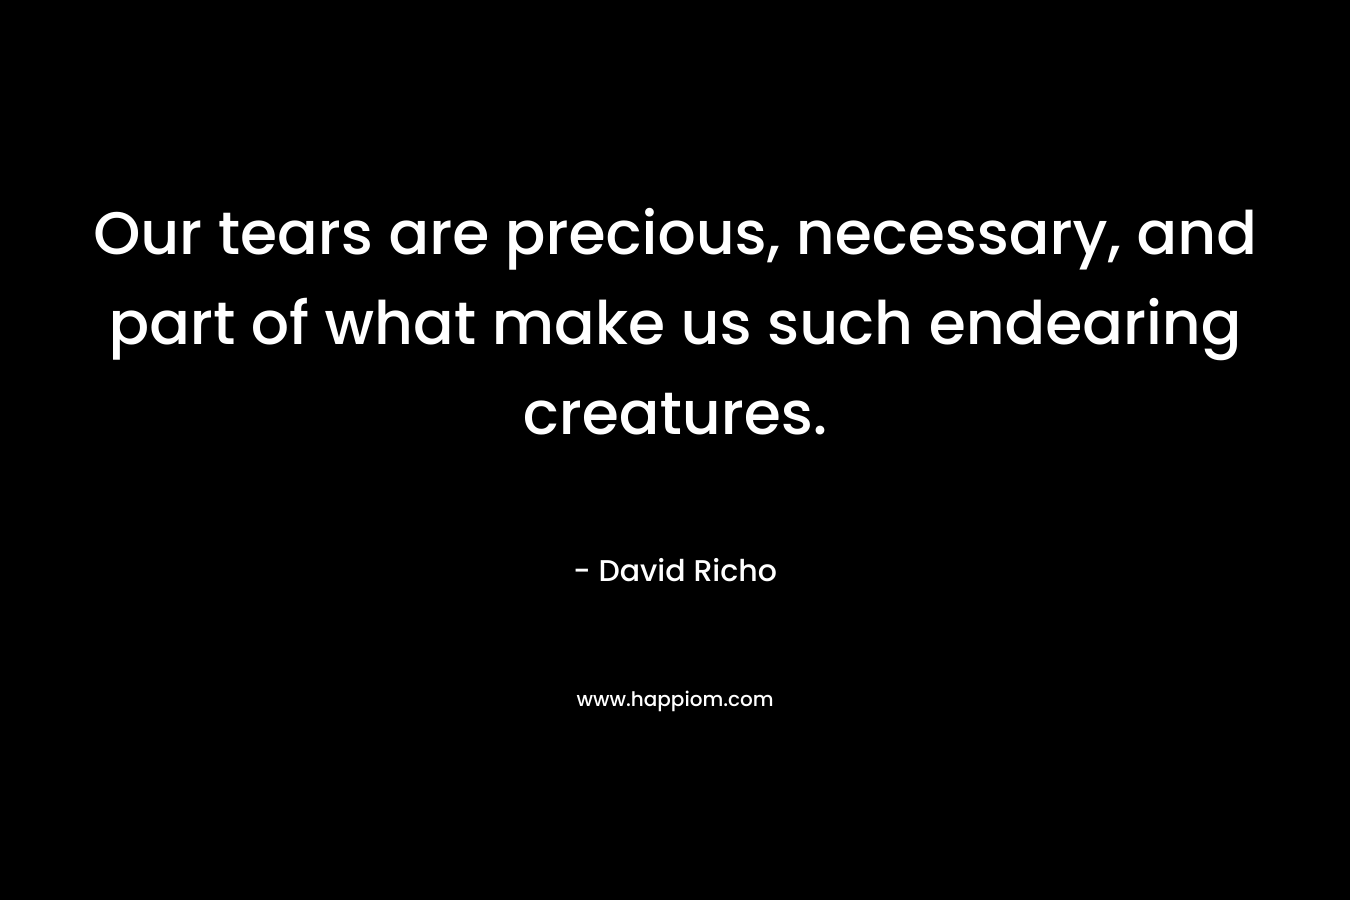 Our tears are precious, necessary, and part of what make us such endearing creatures.